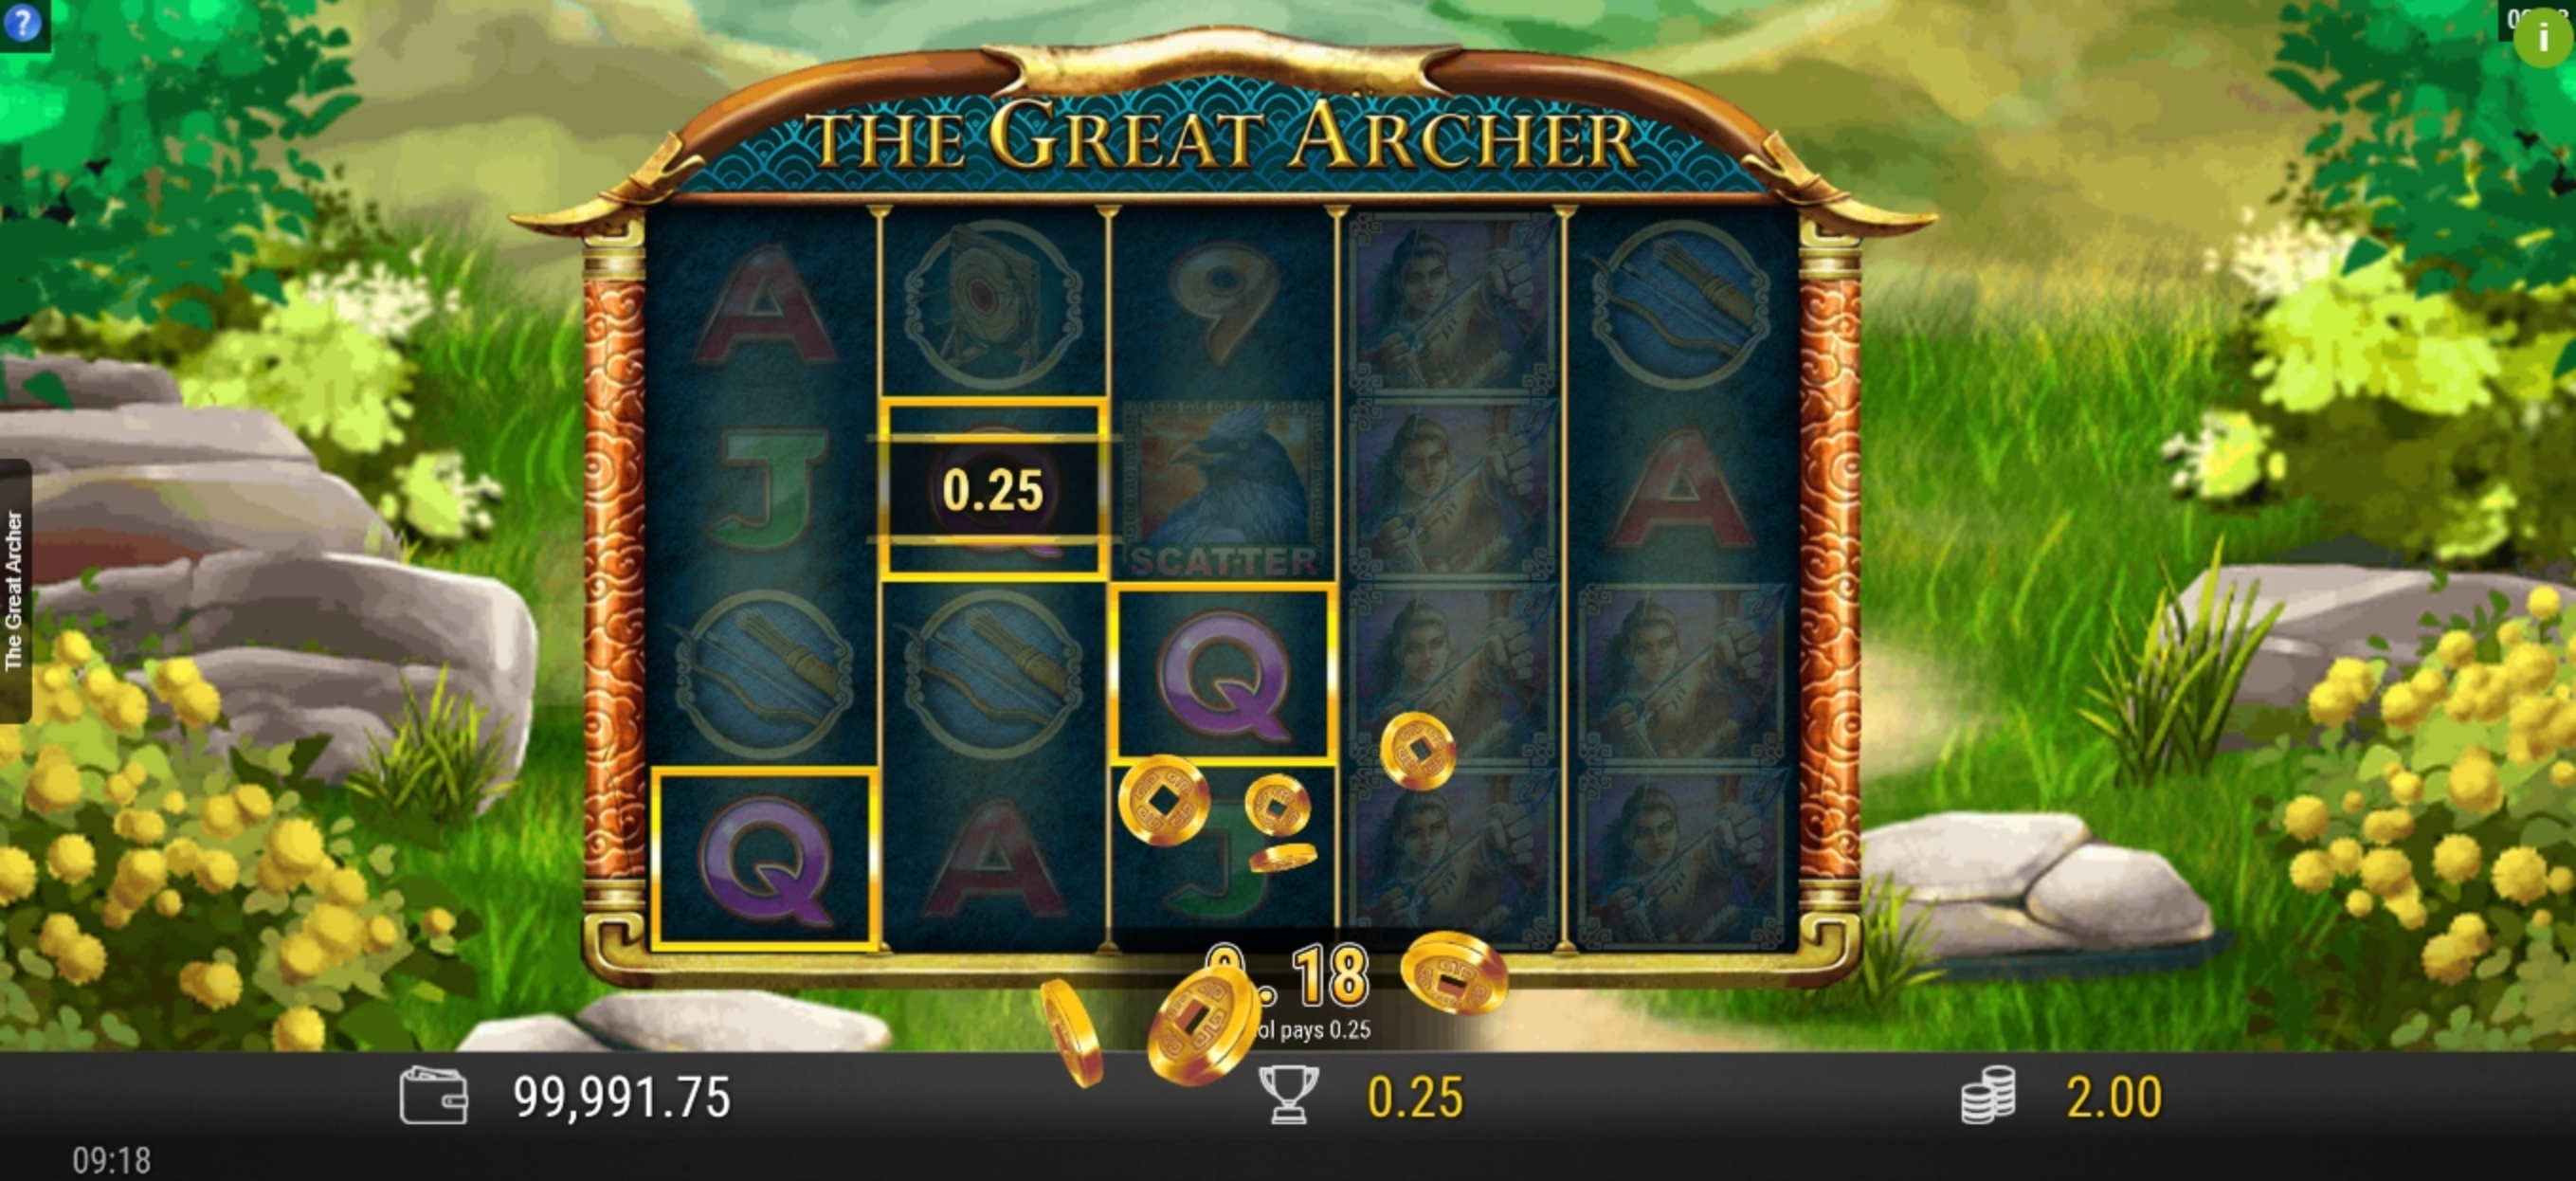 Win Money in The Great Archer Free Slot Game by D-Tech